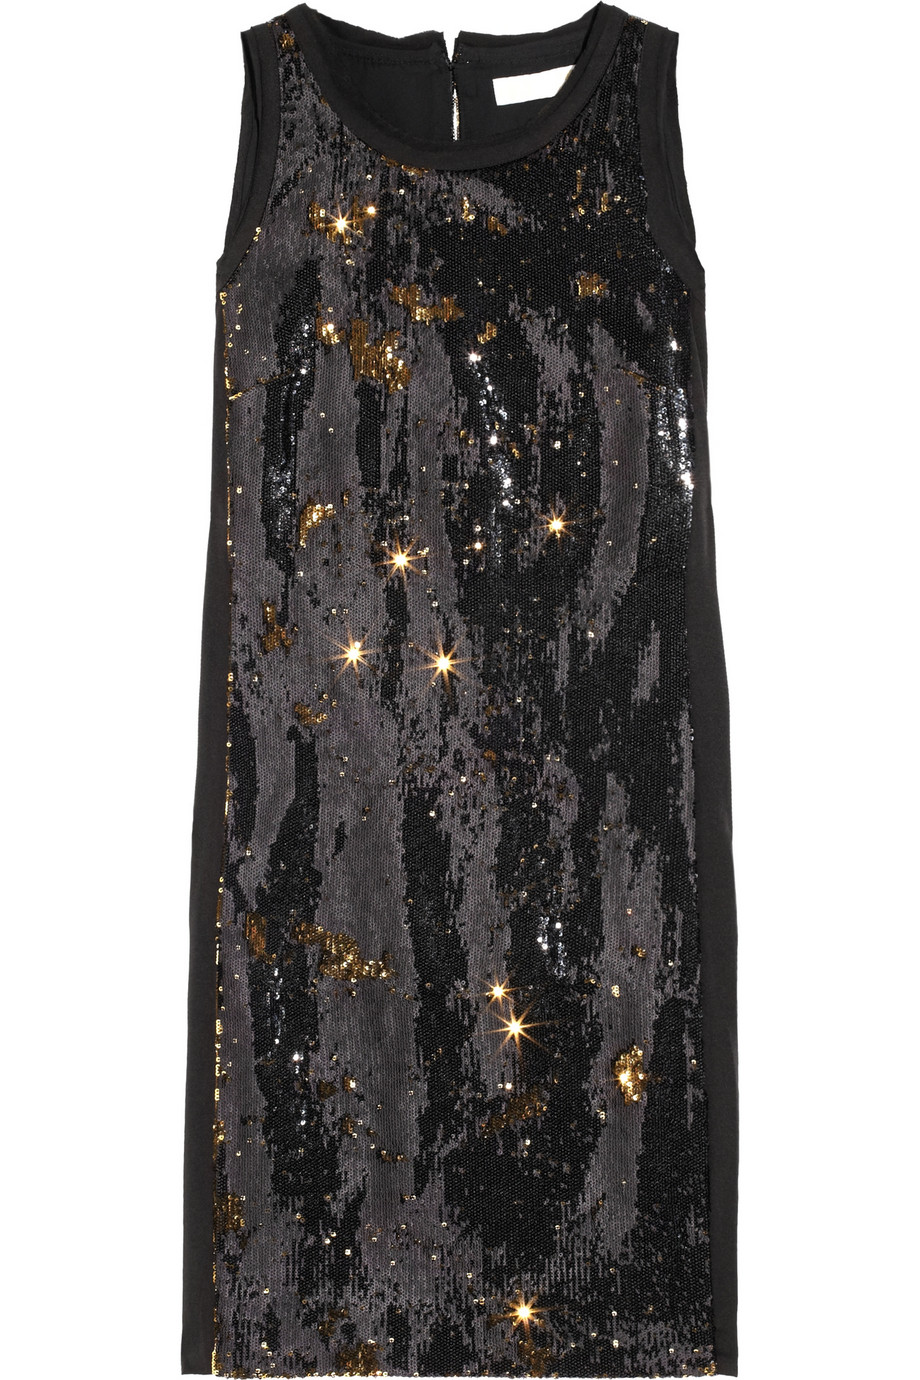 MICHAEL MICHAEL KORS Two-tone crepe dress with sequins